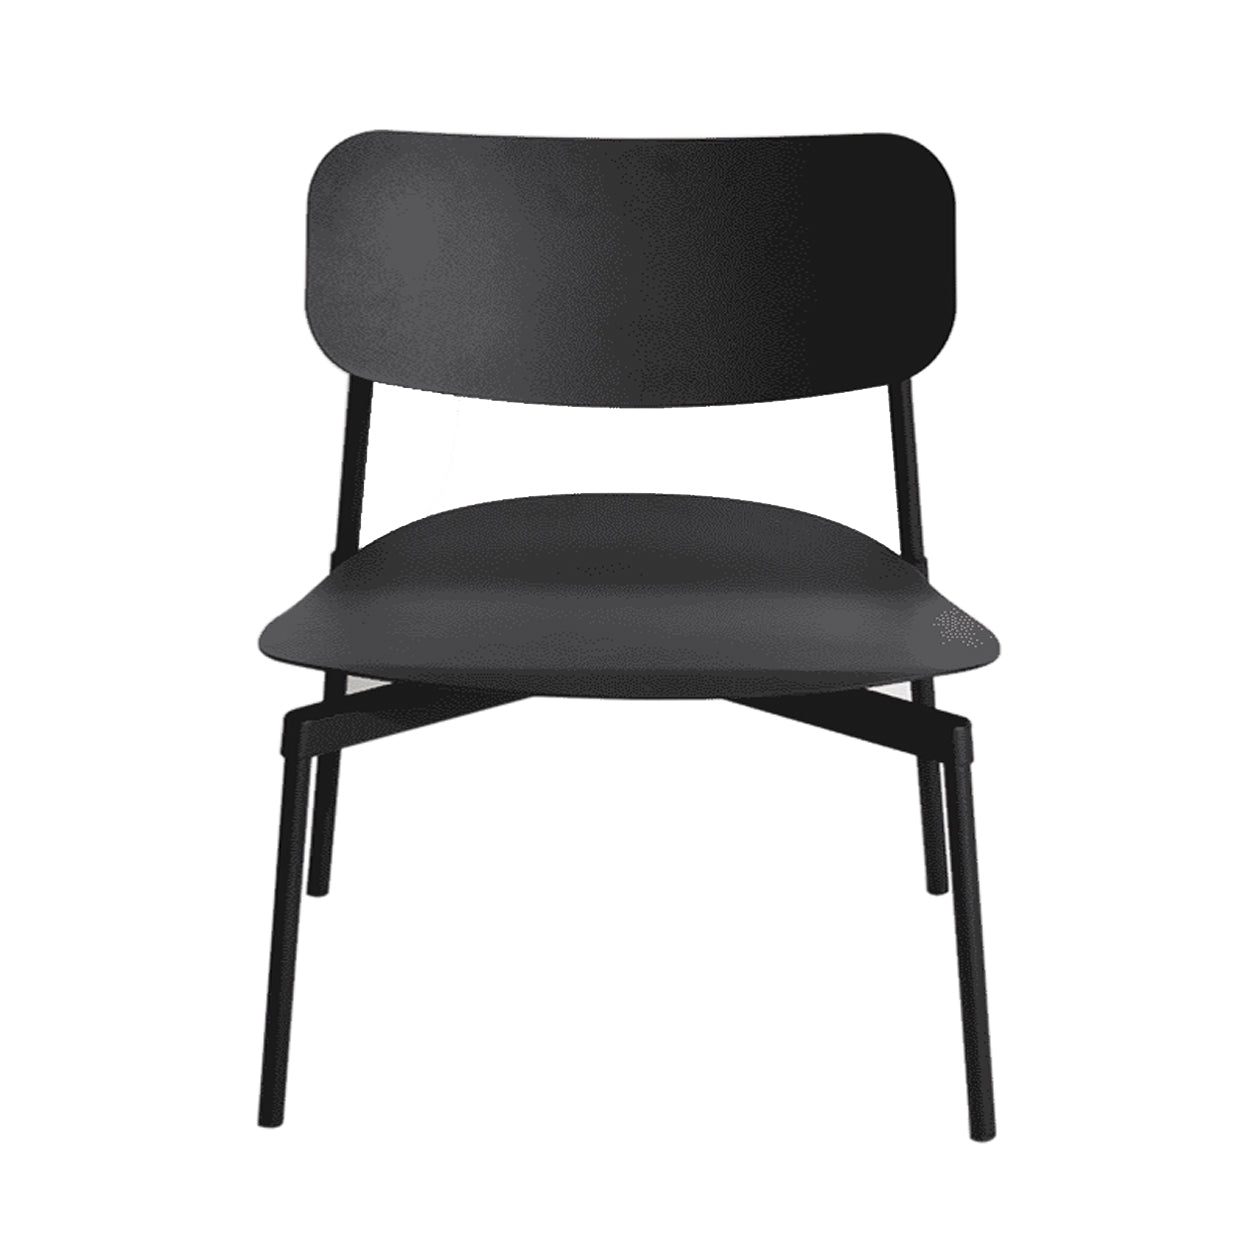 Fromme Stacking Lounge Chair: Black